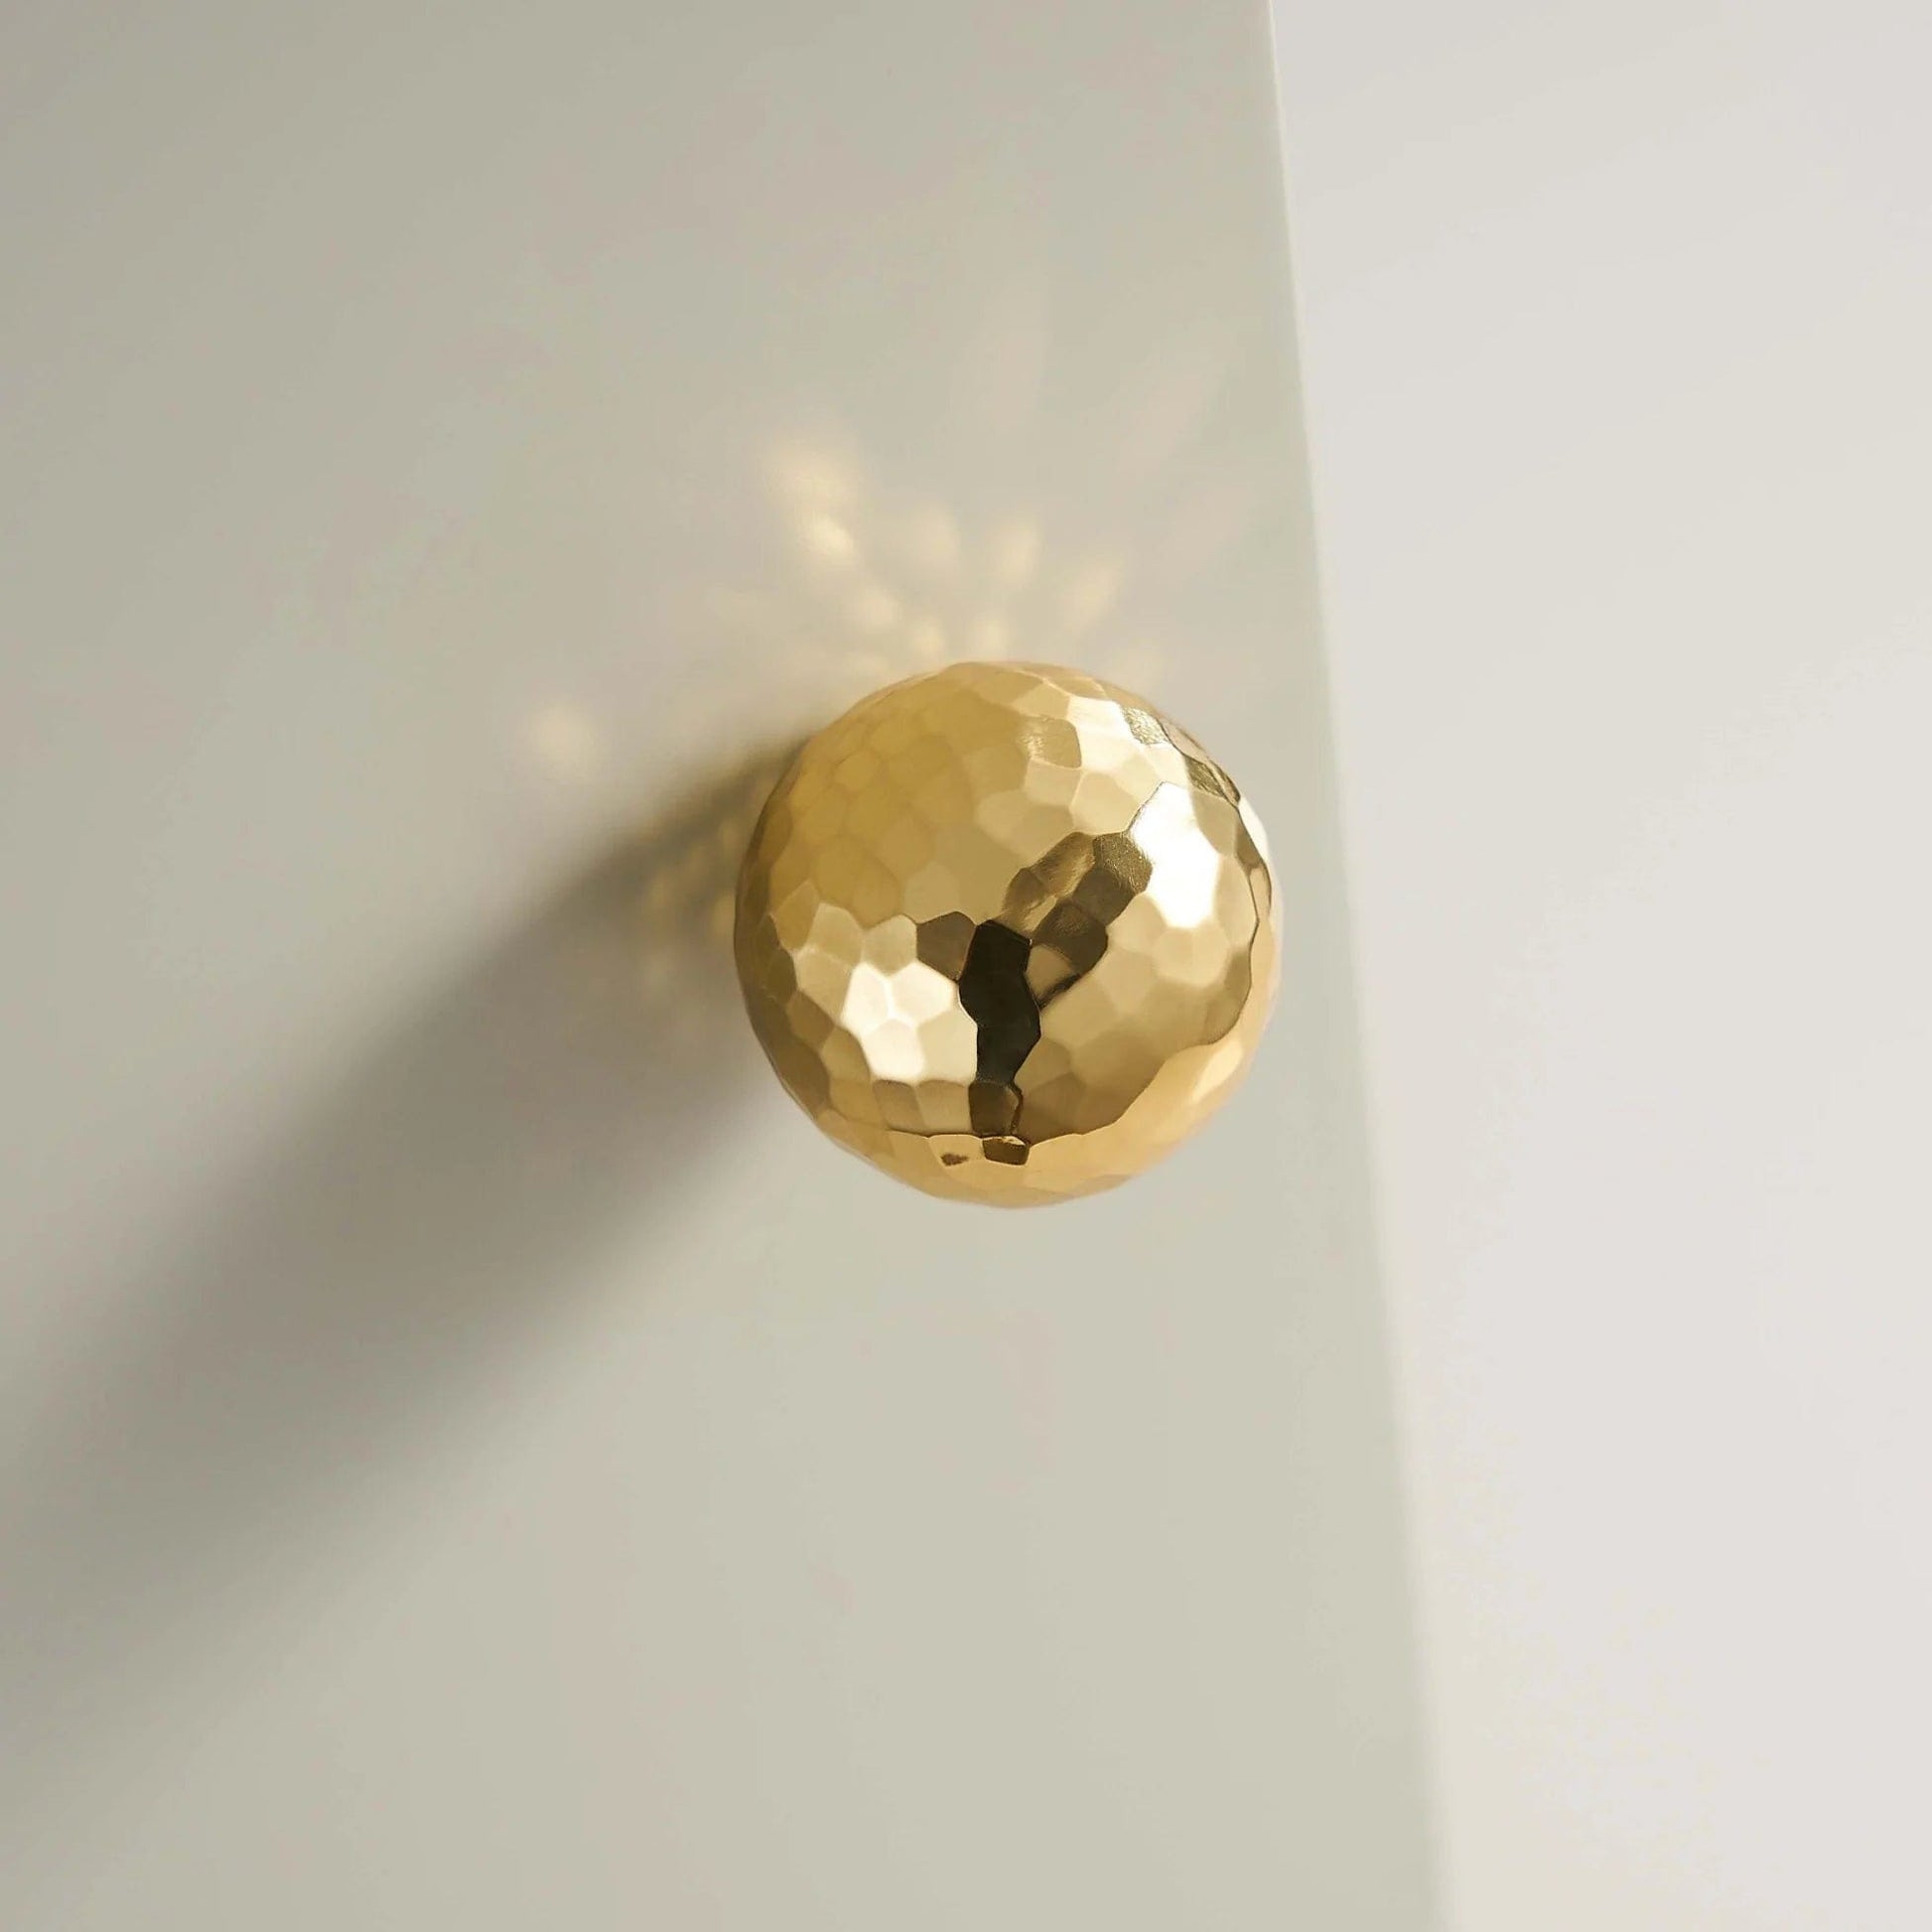 Cabinet Knobs & Handles Knob Large 31mm / Gold Hammer Finish / Solid Brass Bayside Luxe - Hobart Hammer Finish Handles